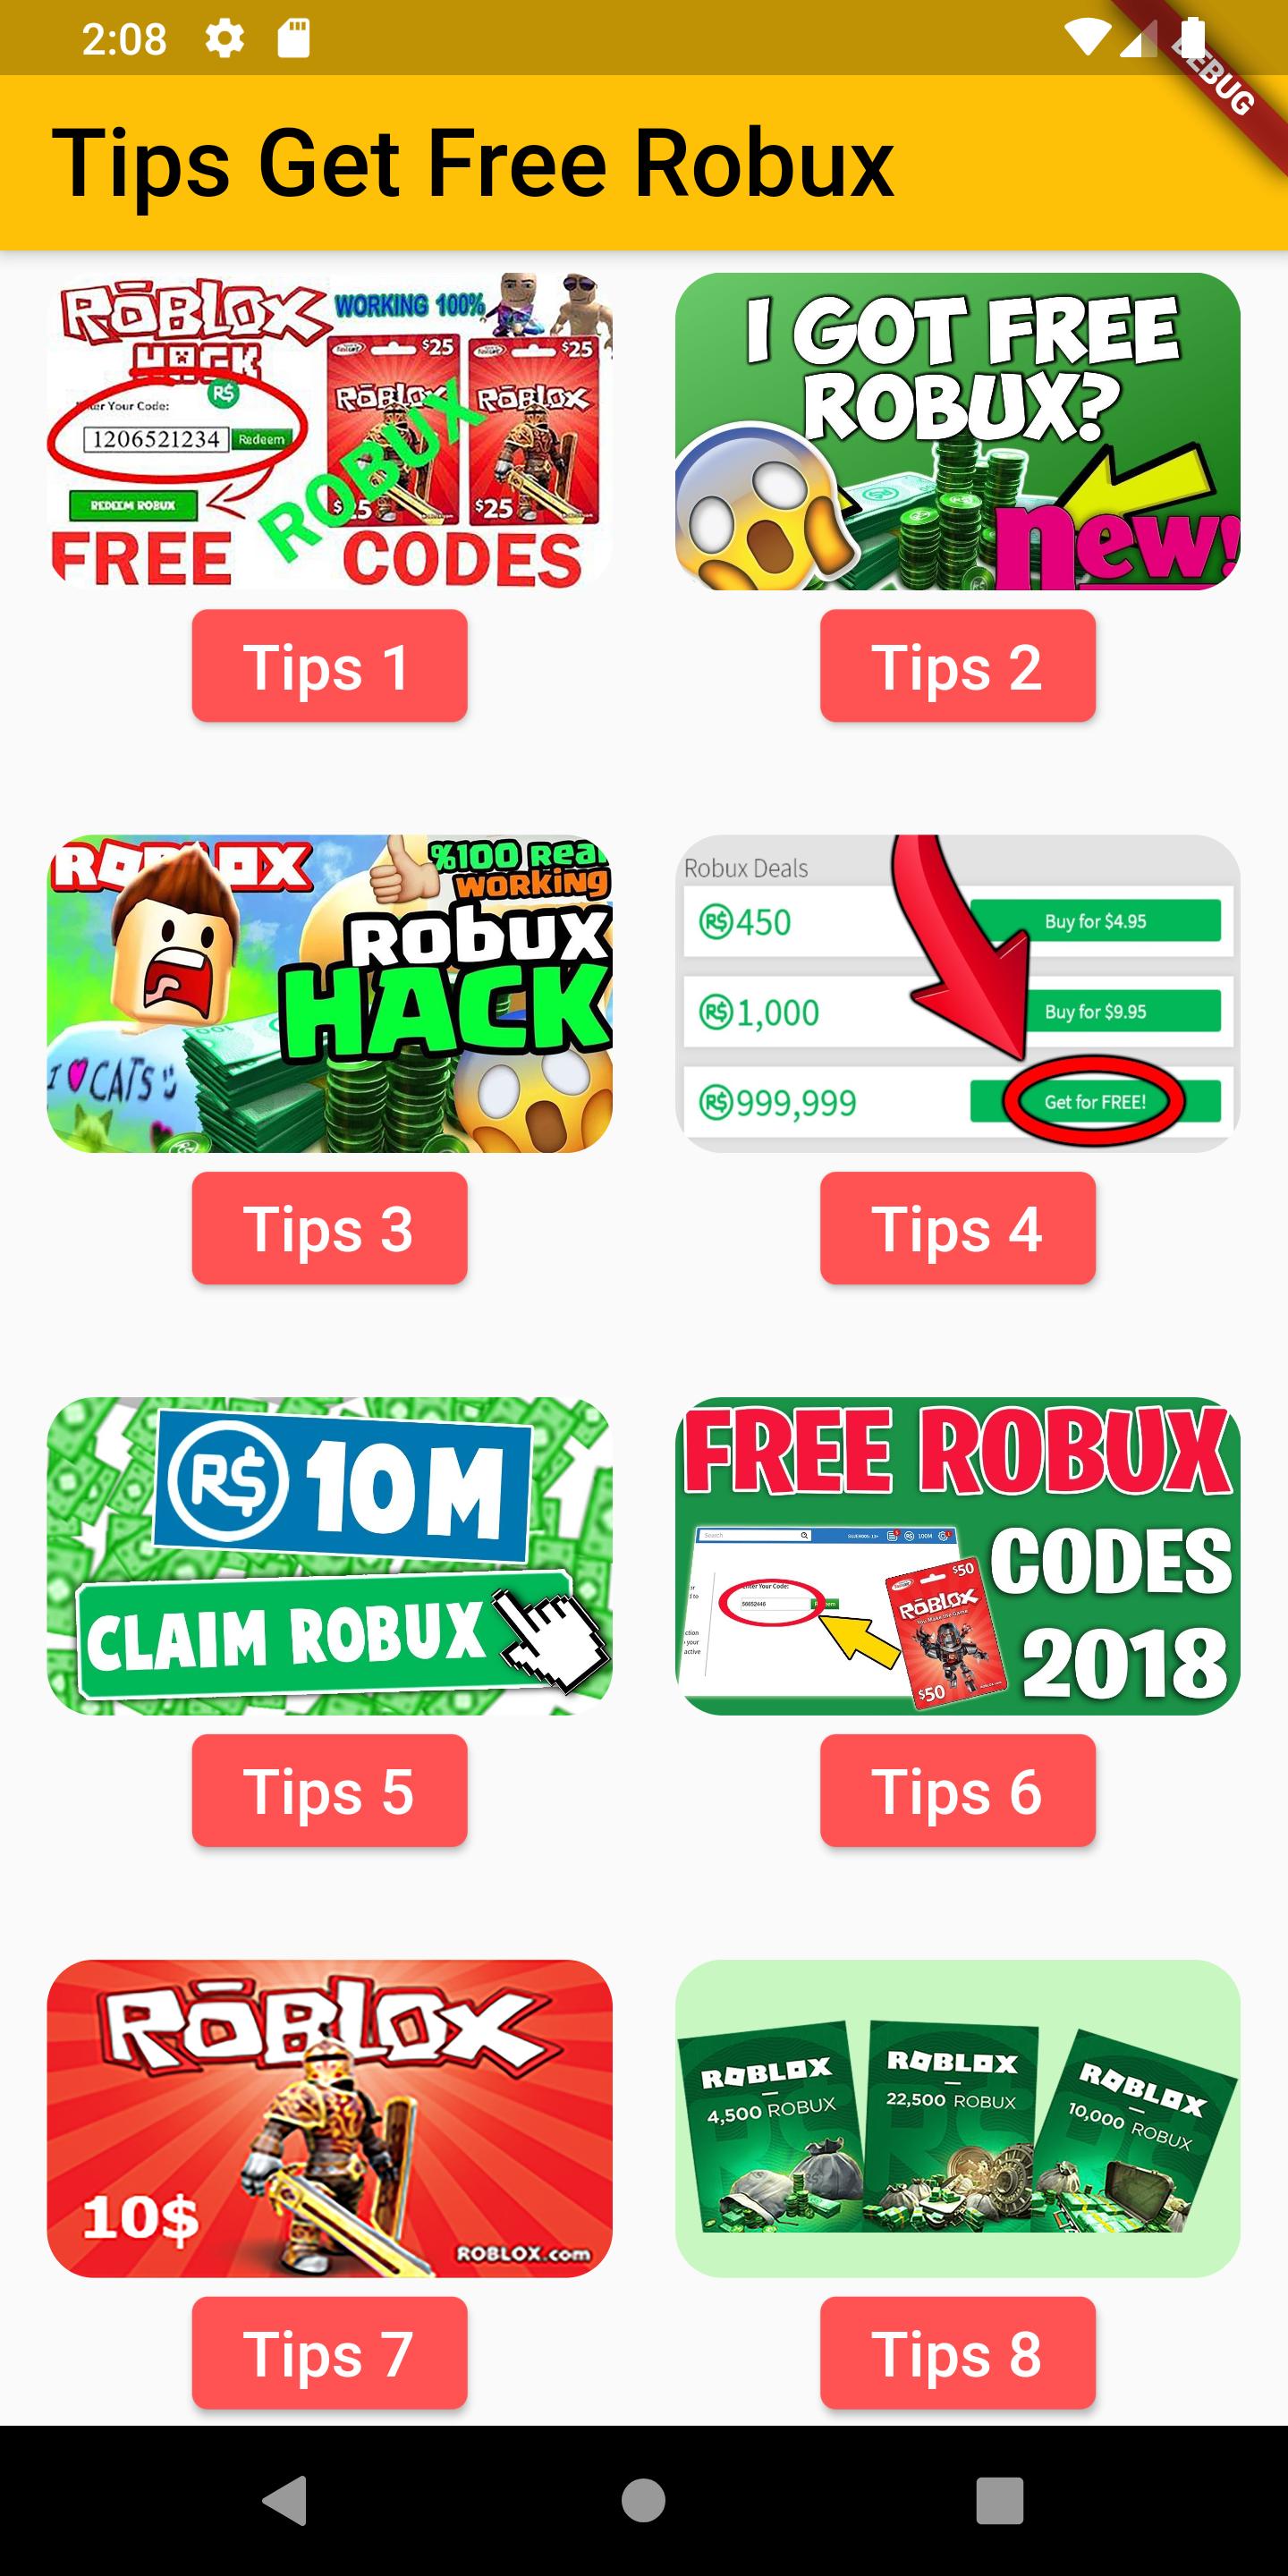 Trips Get Free Robux For Roblox Rbx For Android Apk Download - roblox bedava robux var